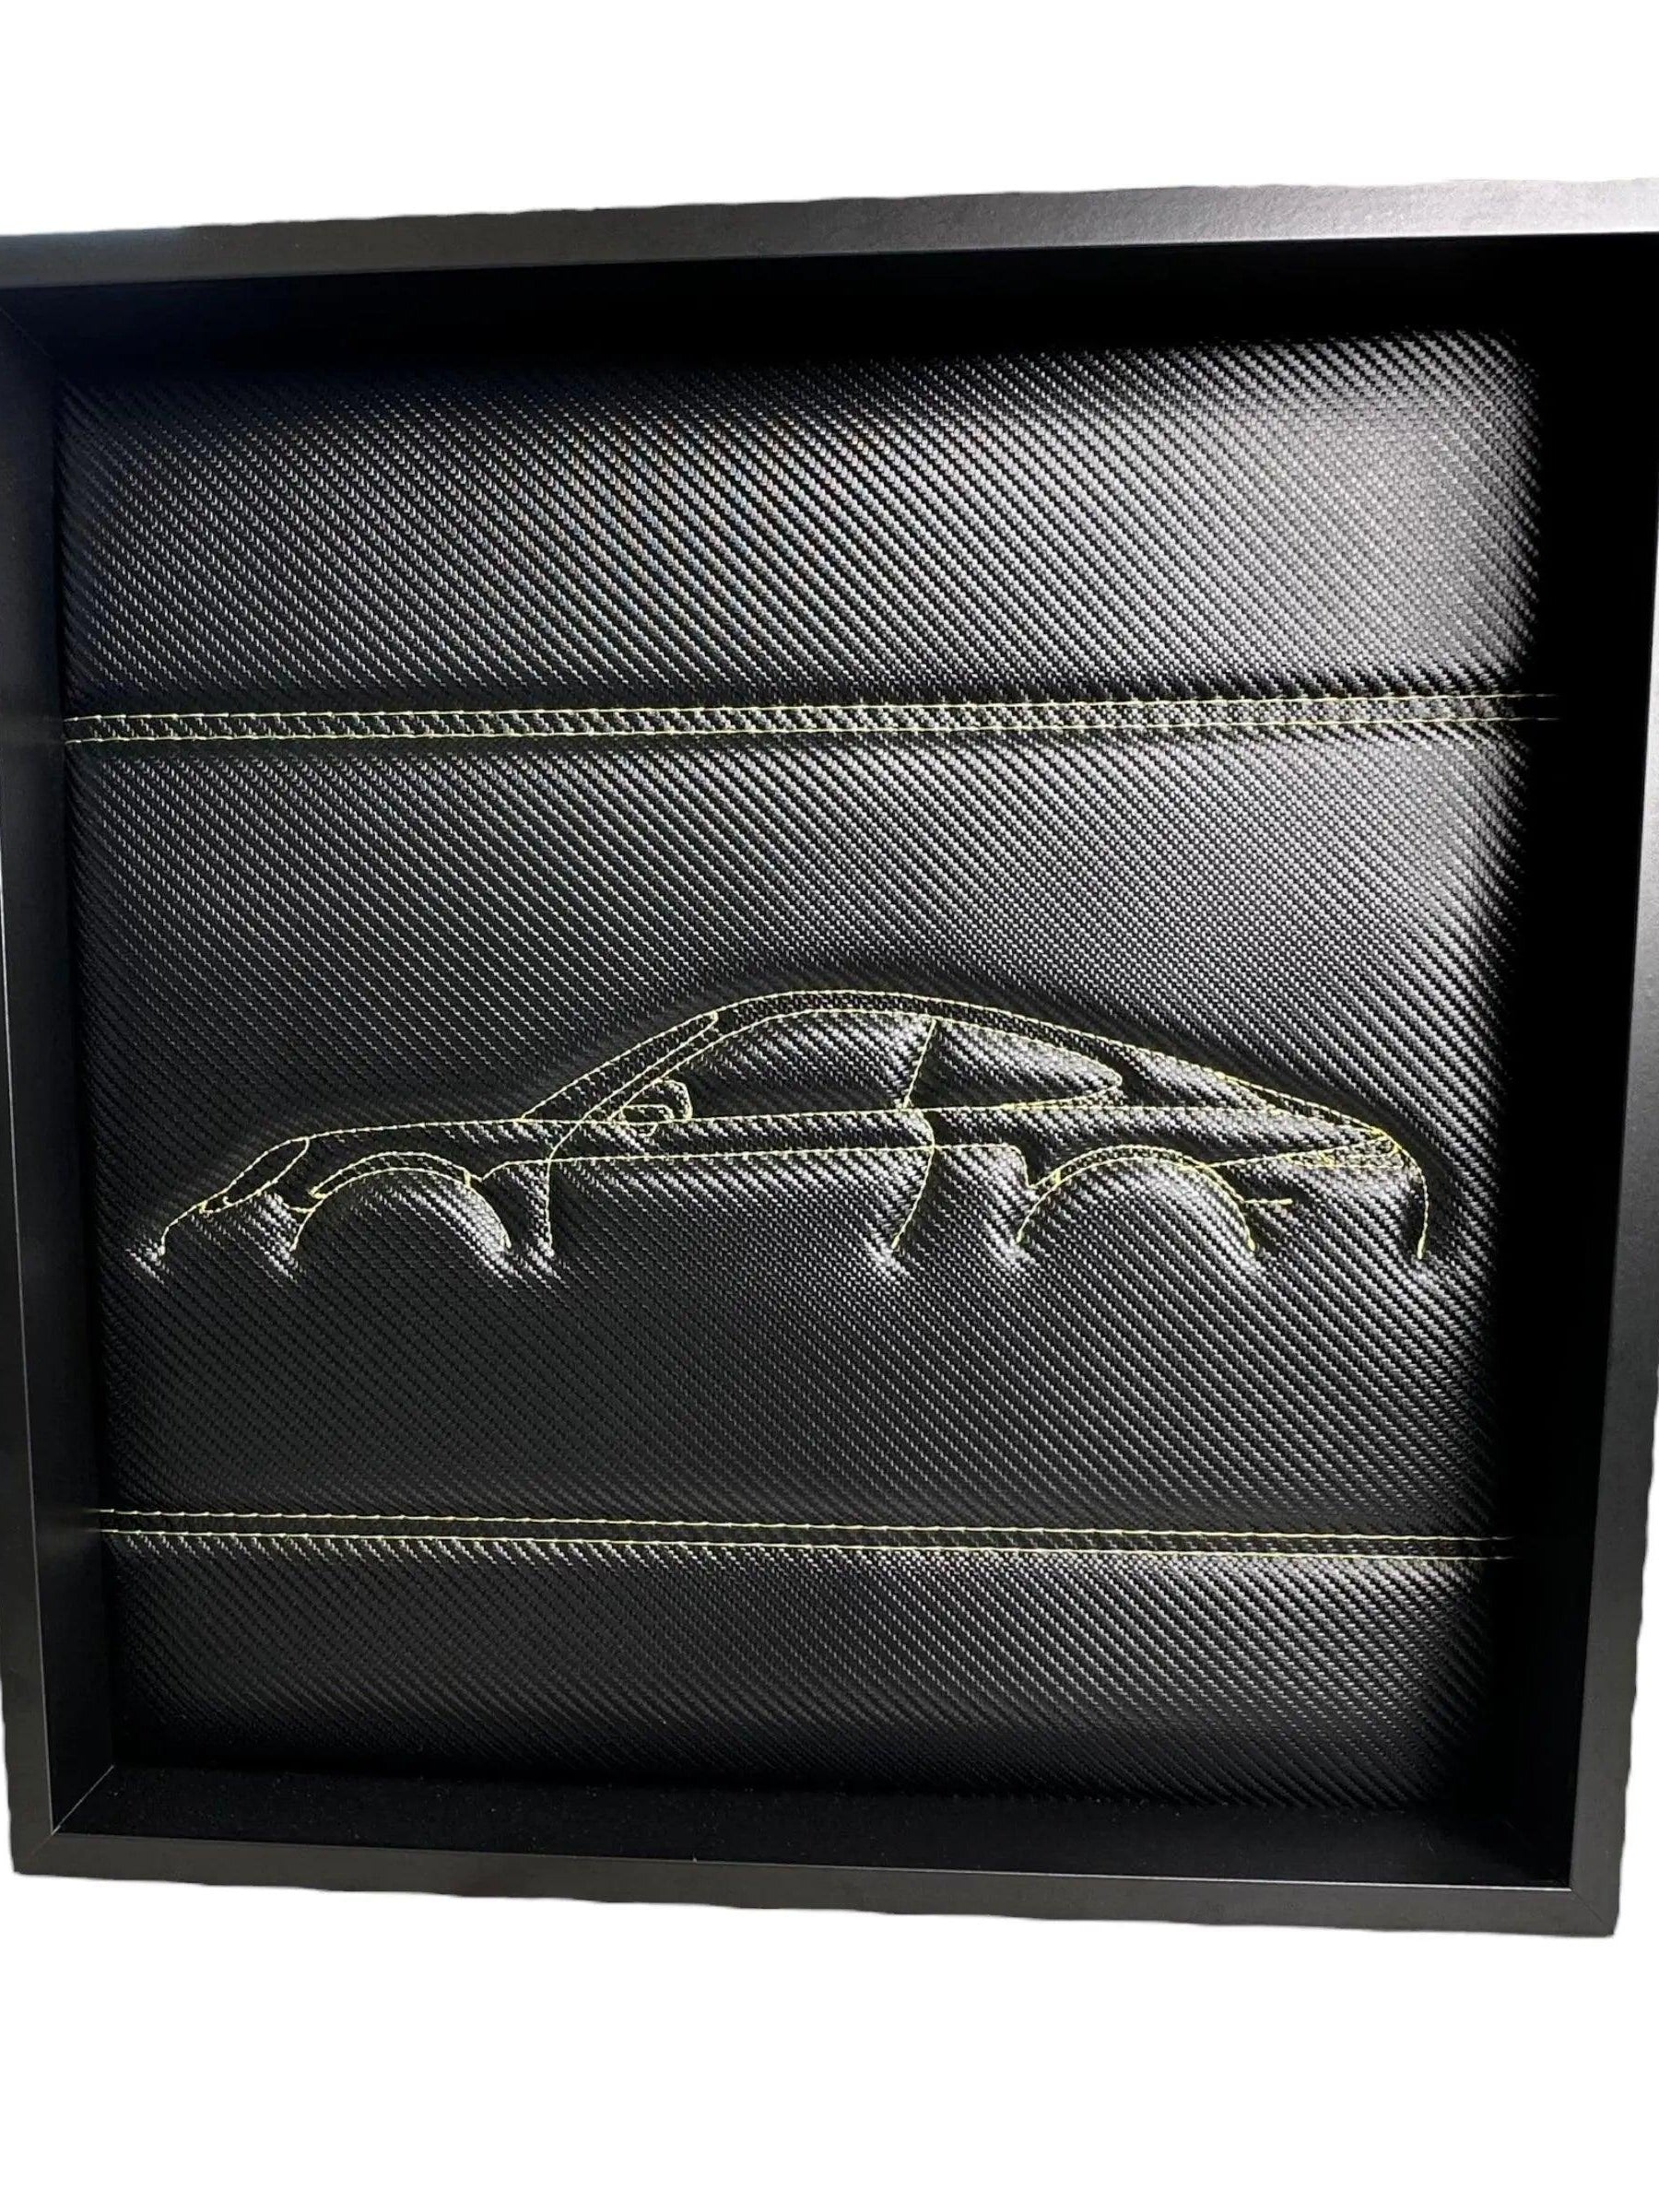 Carbon Fiber Leather Porsche 911 - 991 Inspired Wall Art: Embroidered Yellow Stitch Luxury Decor - AutoWin